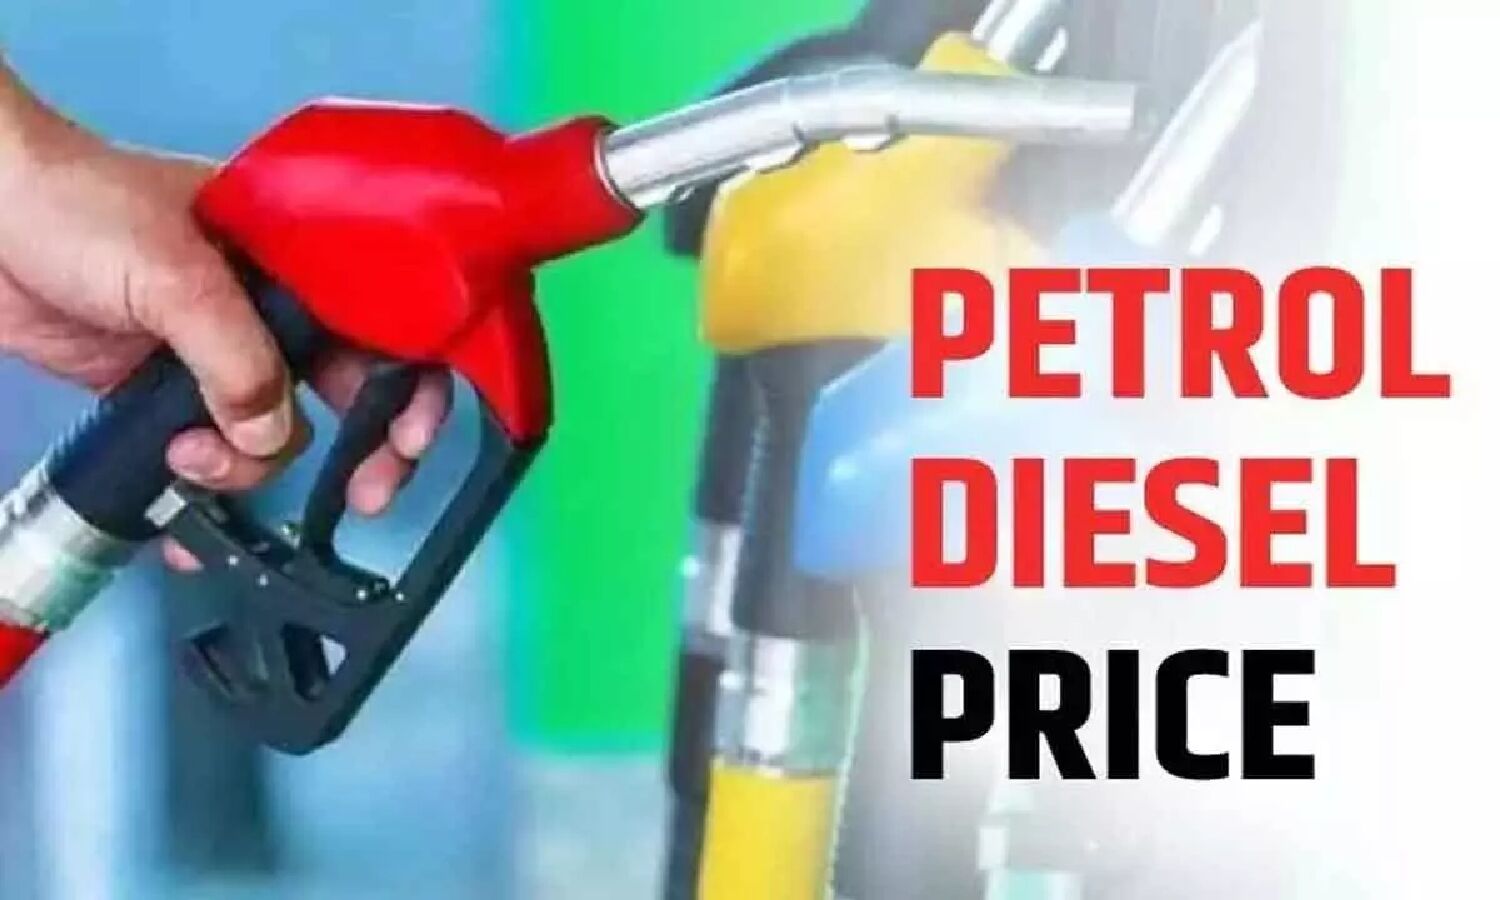 Petrol-Diesel Price Today: Oil companies gave relief, know the latest rate of petrol-diesel today